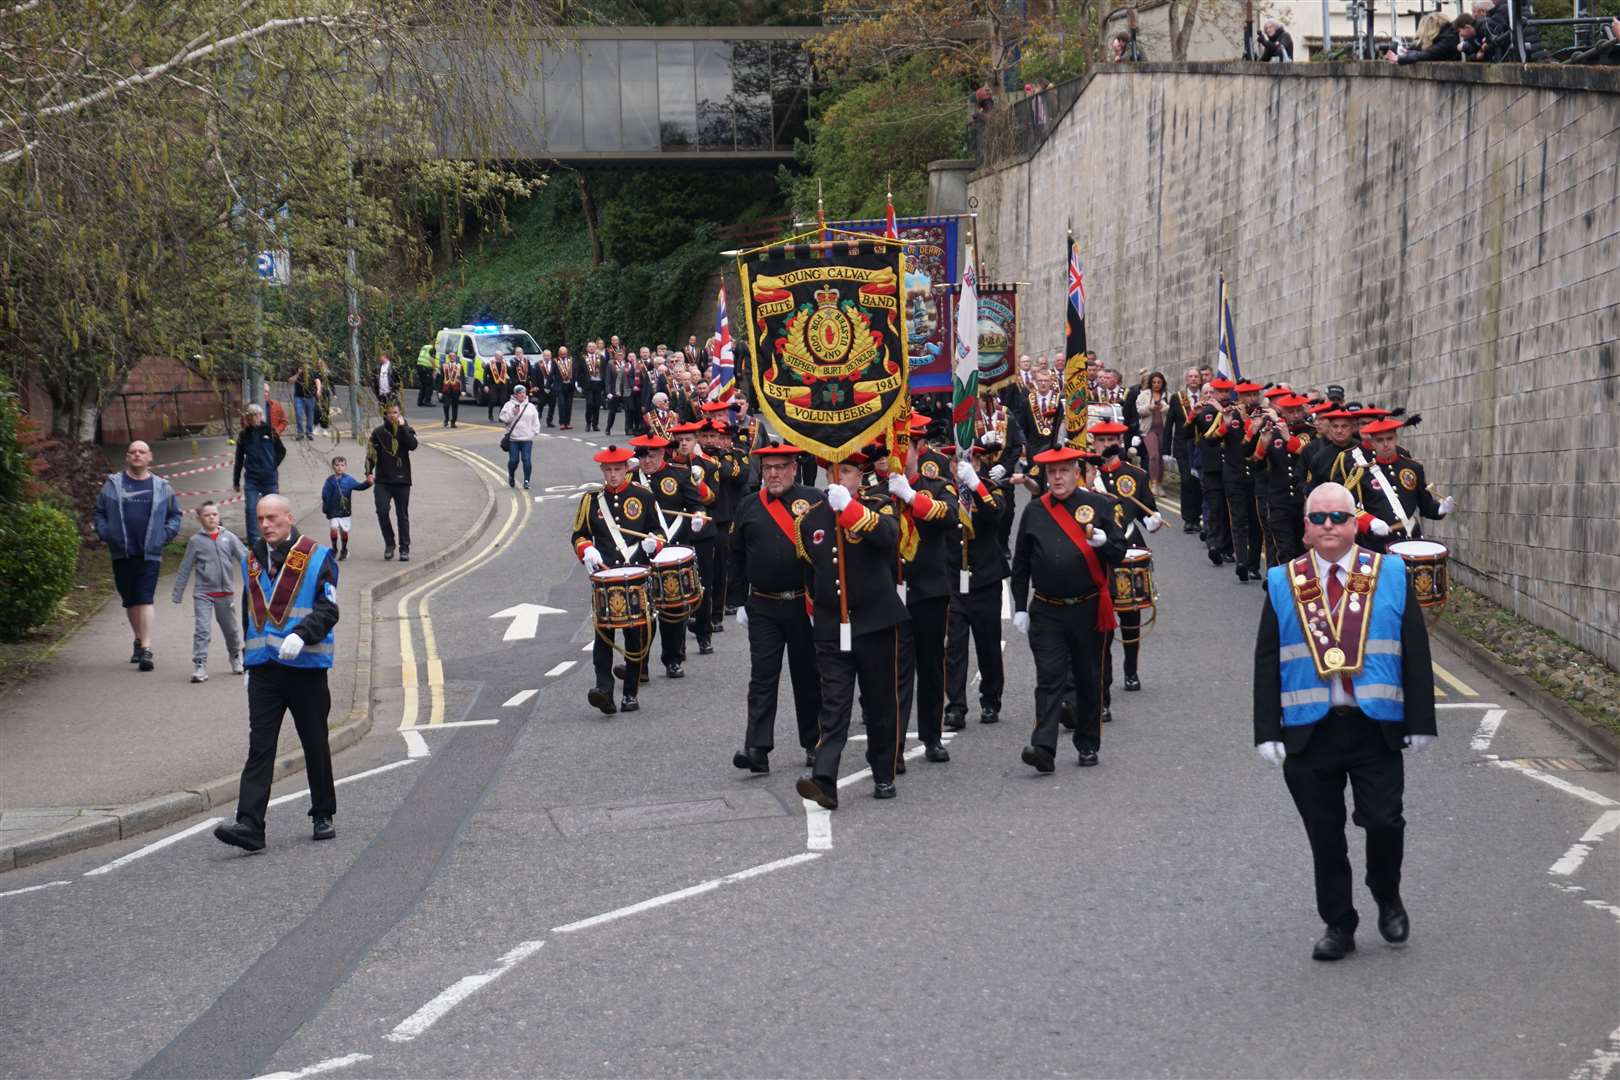 The Apprentice Boys of Derry paraded in Inverness city centre. Picture: Federica Stefani.